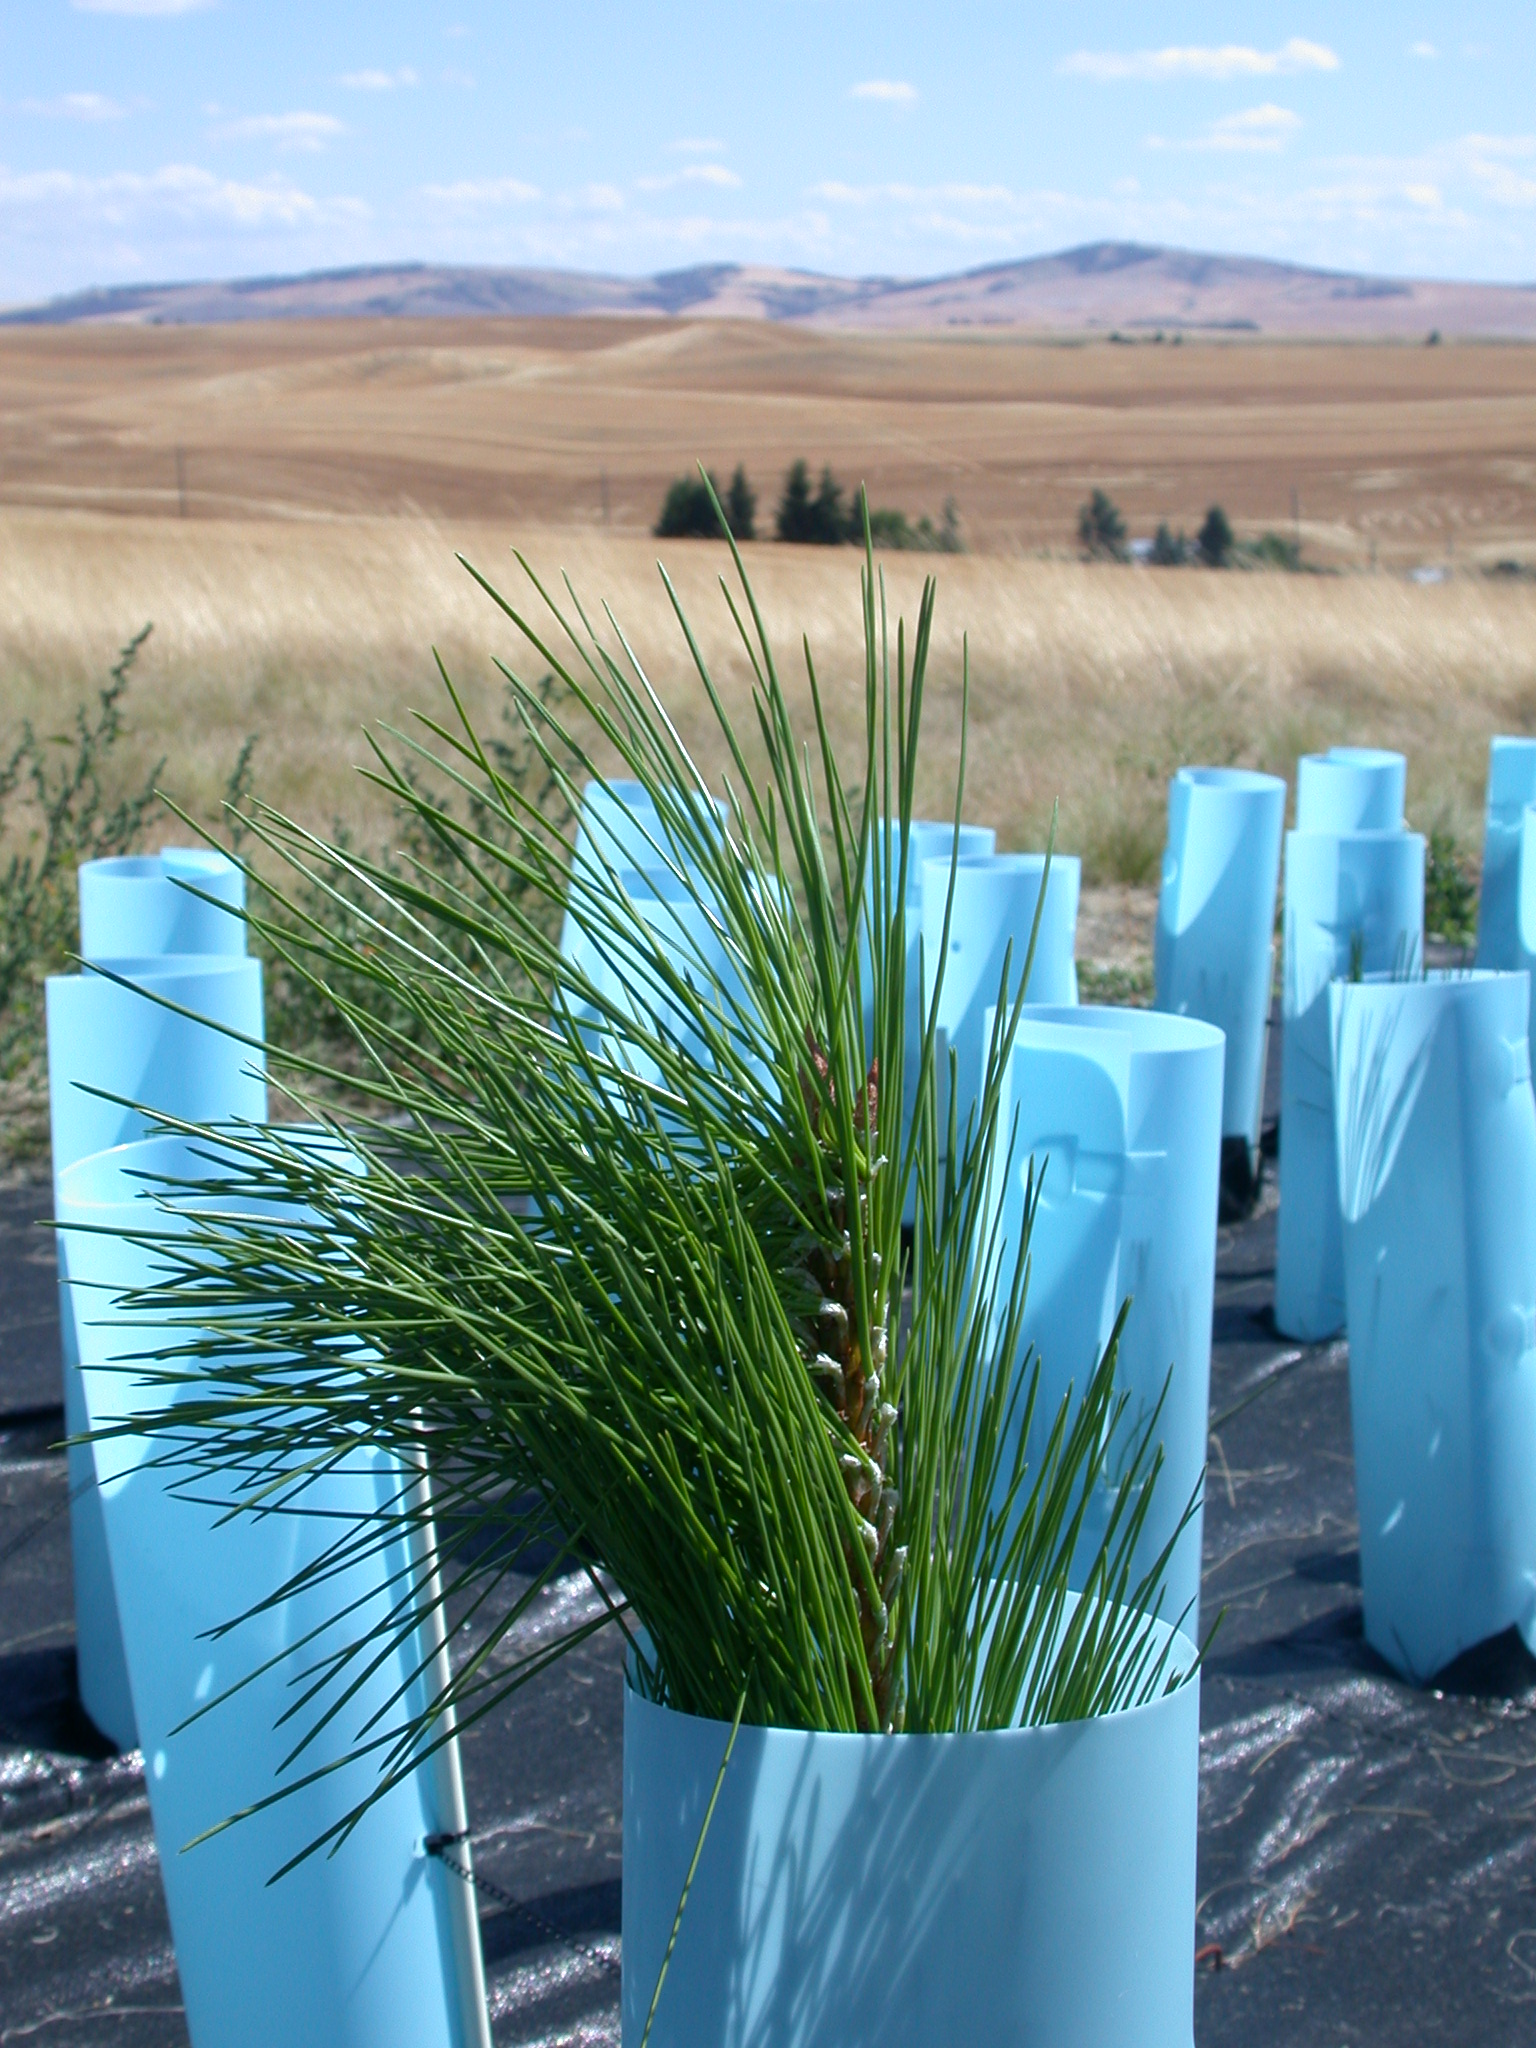 A test planting at the Pullman Ponderosa Pine Seed Orchard Site